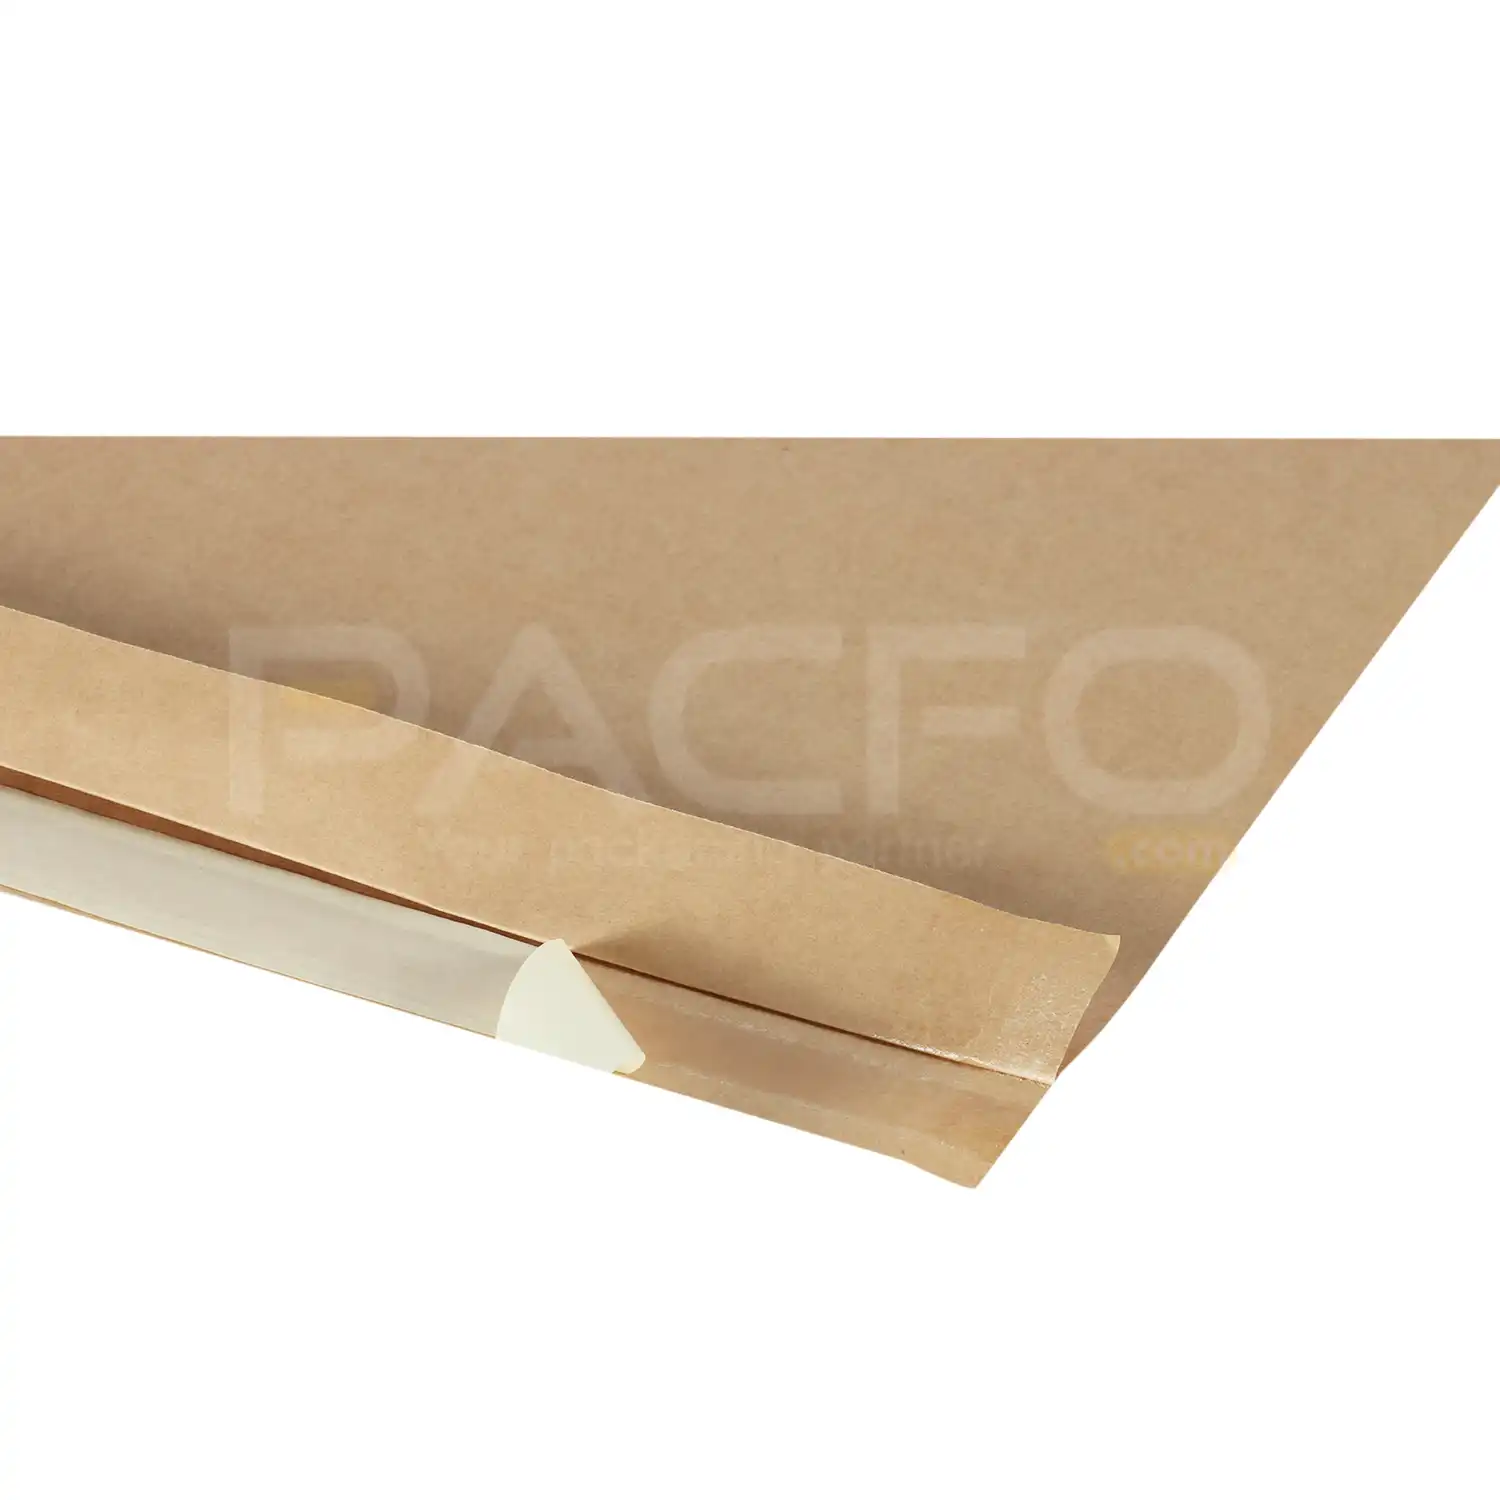 Brown Kraft Paper Mailer Bags 13 X 14.7 Inches